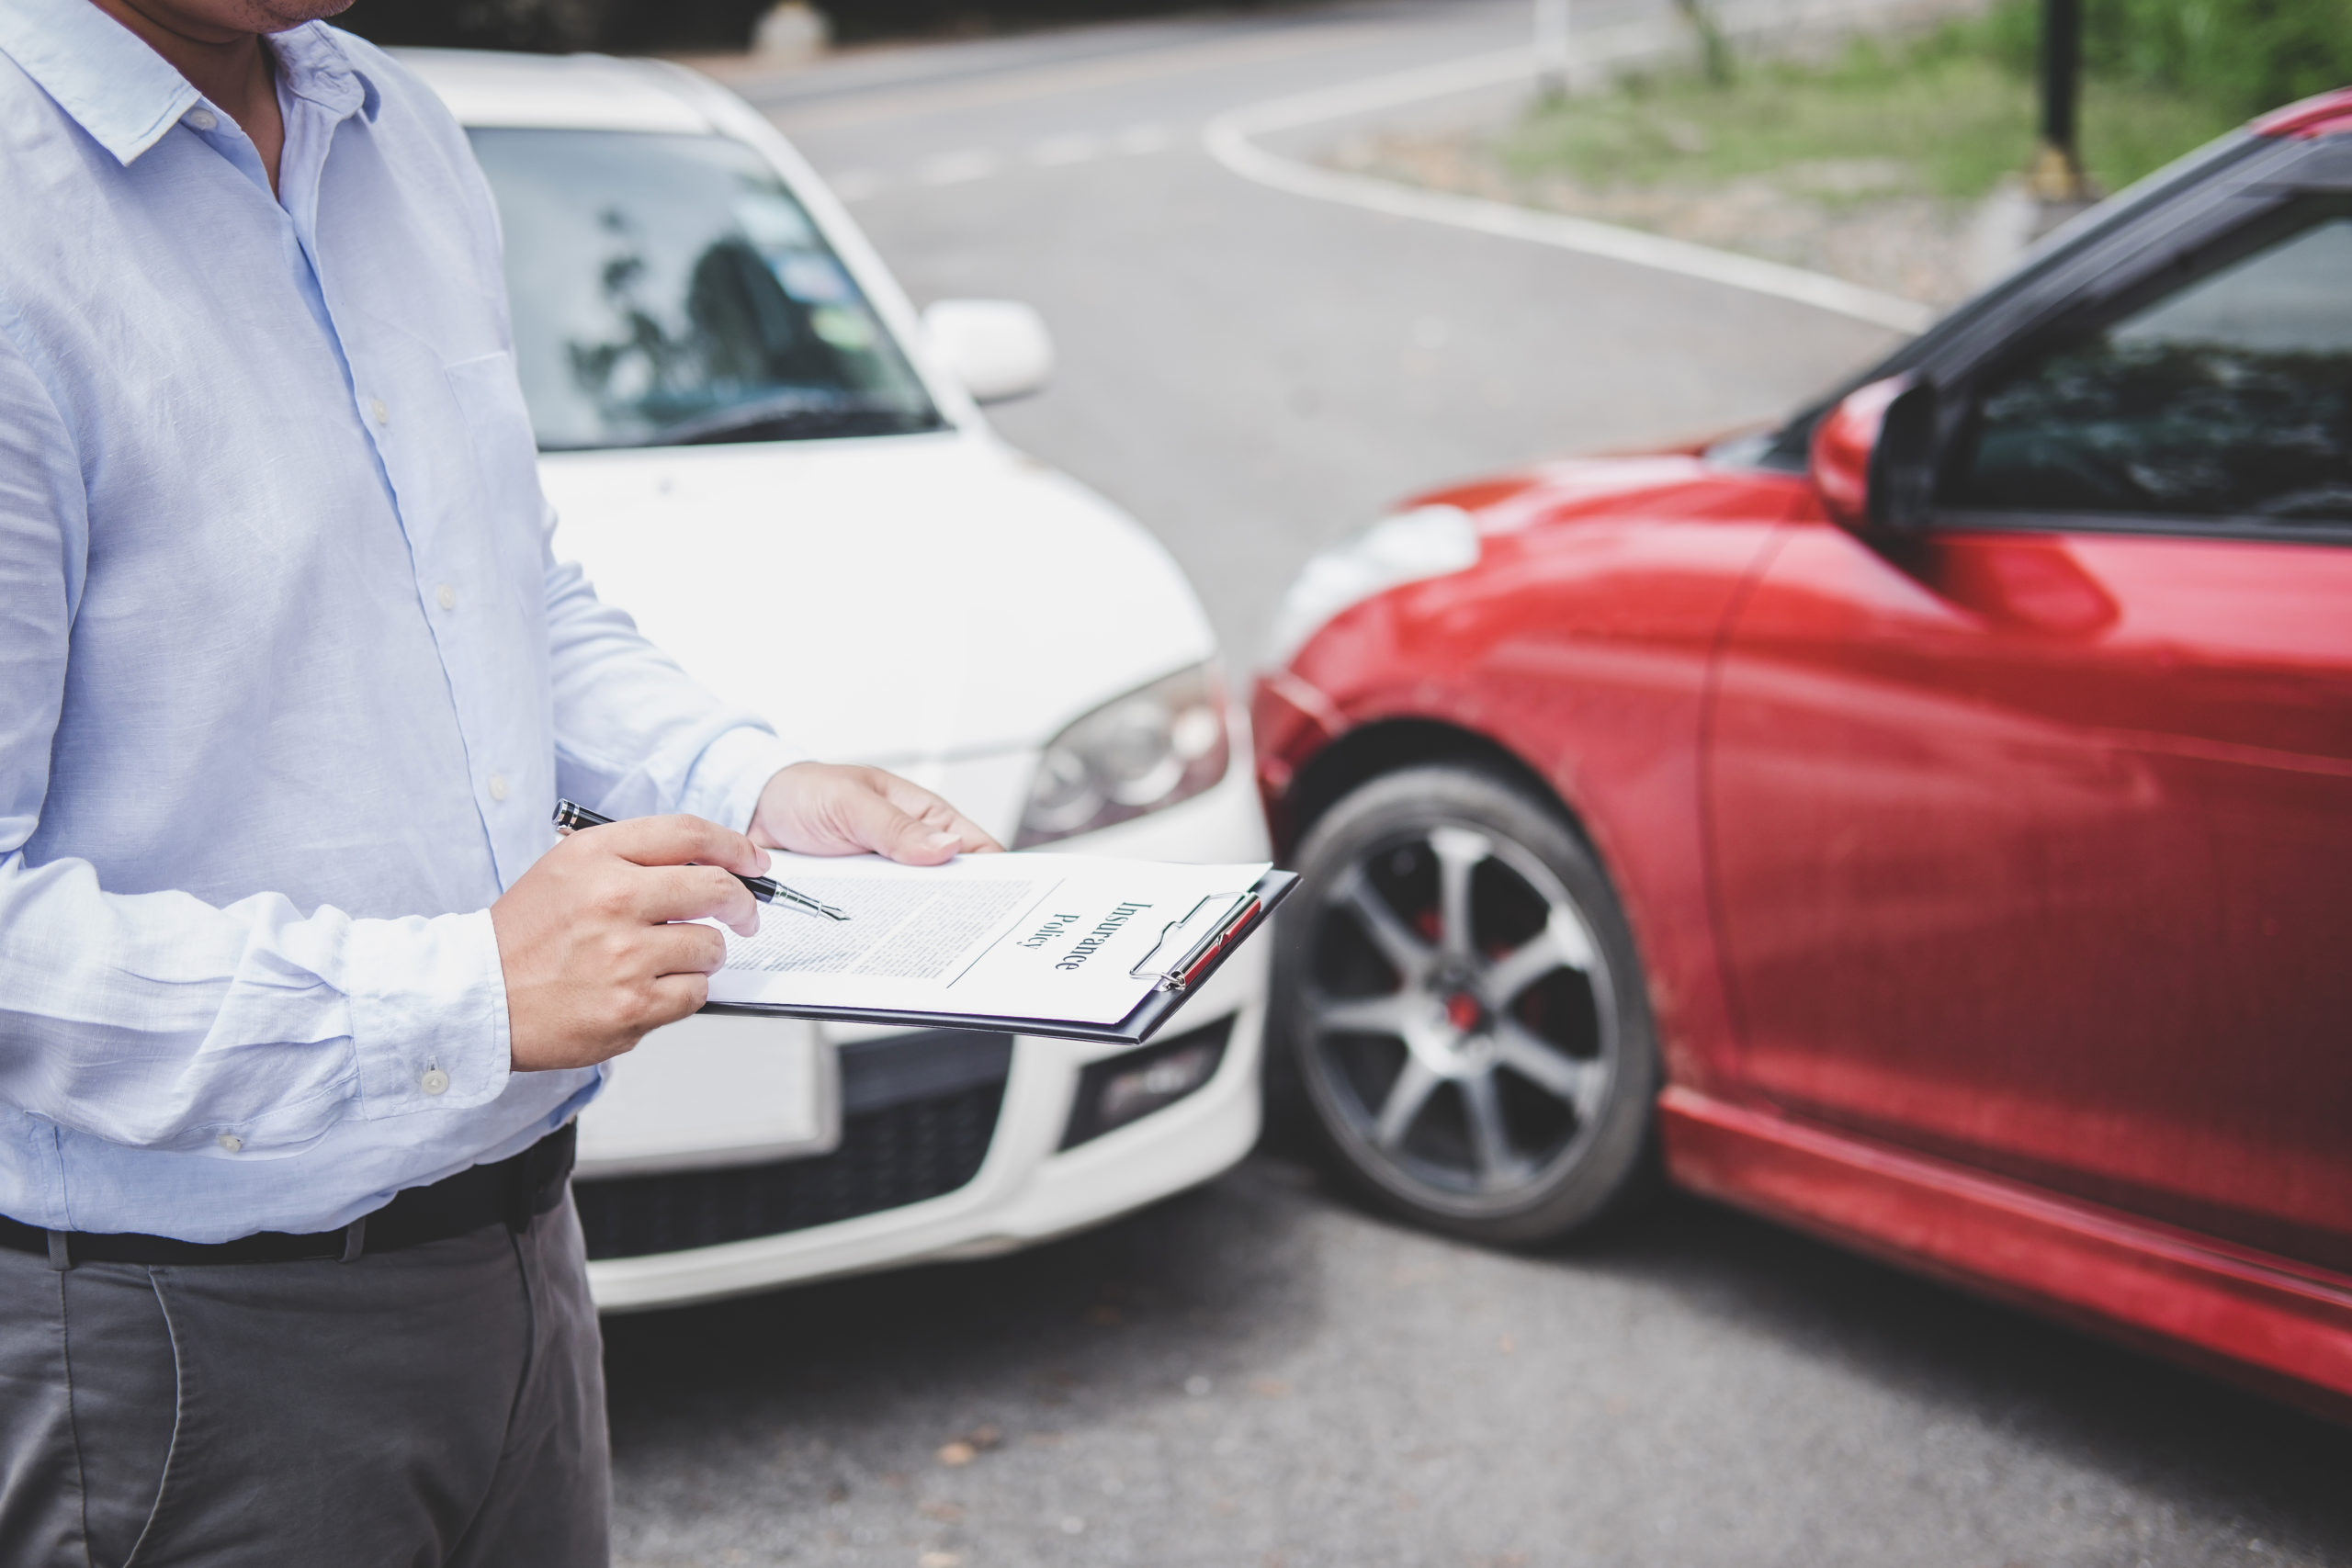 Are Car Accidents Covered Under Workers’ Compensation in Arizona? - Matt Fendon Law Group